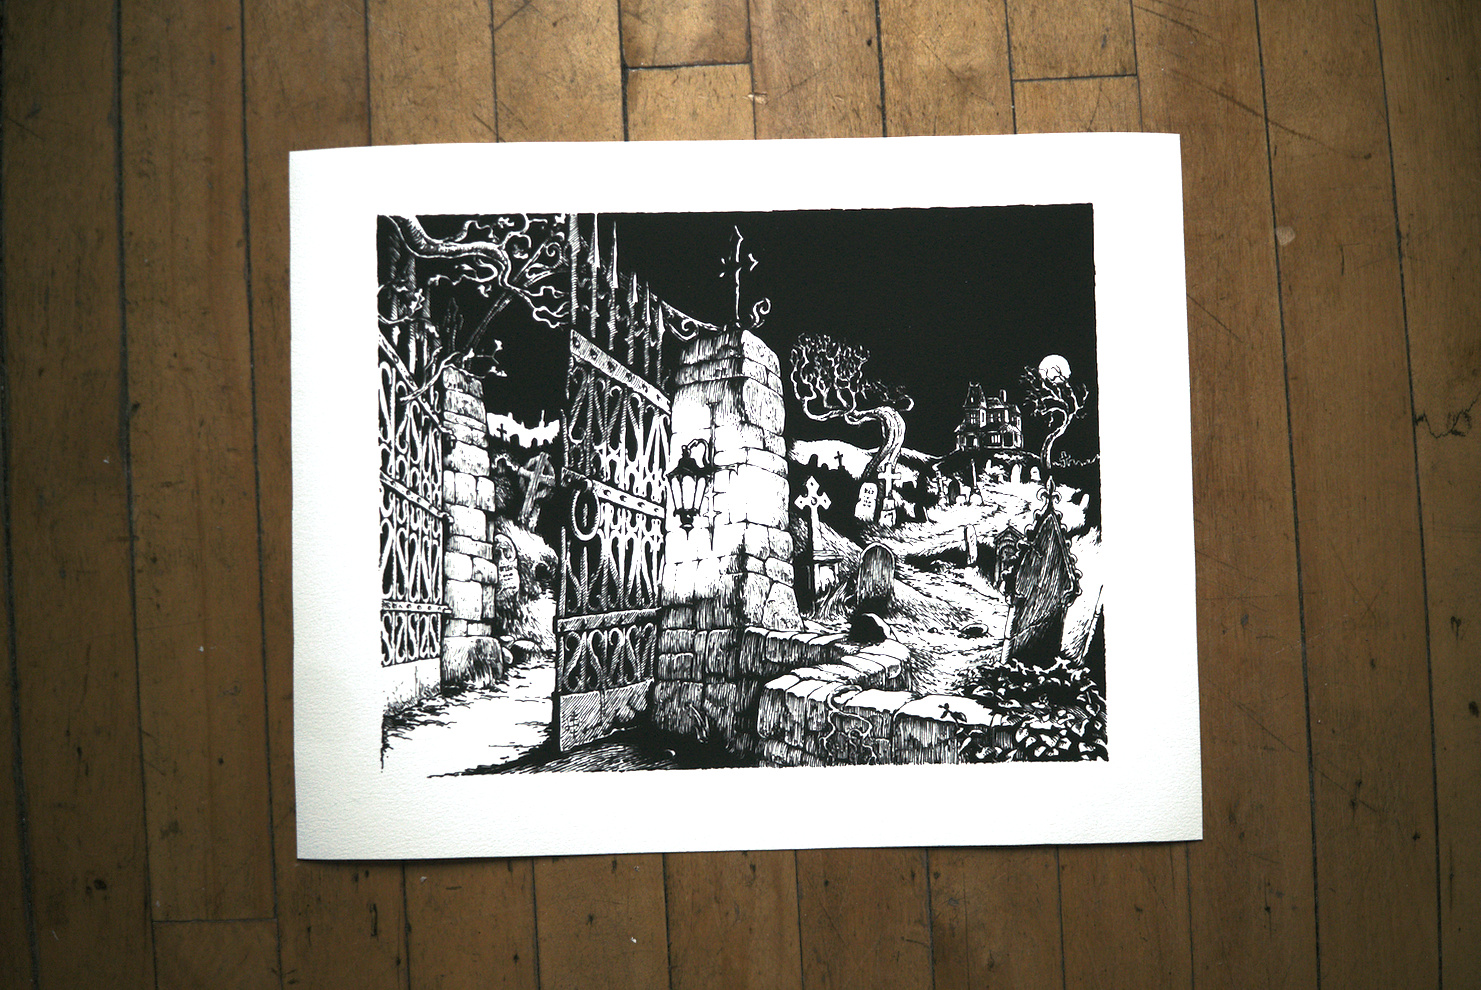 Photo of the art print of the cemetery illustration featuring on the cover of the zine